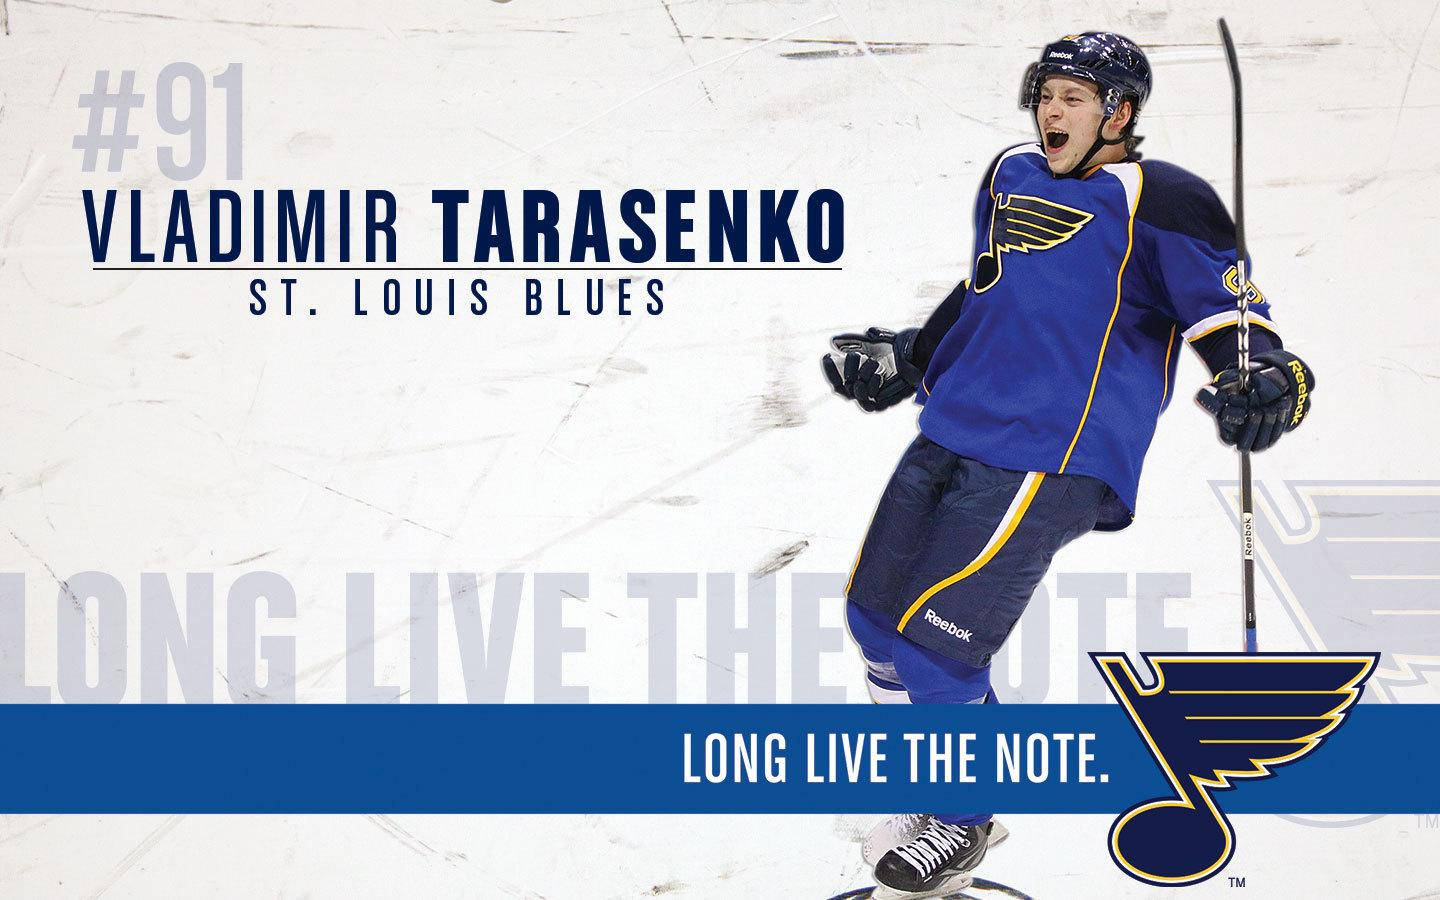 Vladimir Tarasenko Shouting Expression While Holding Hockey Stick With Team Quote Wallpaper